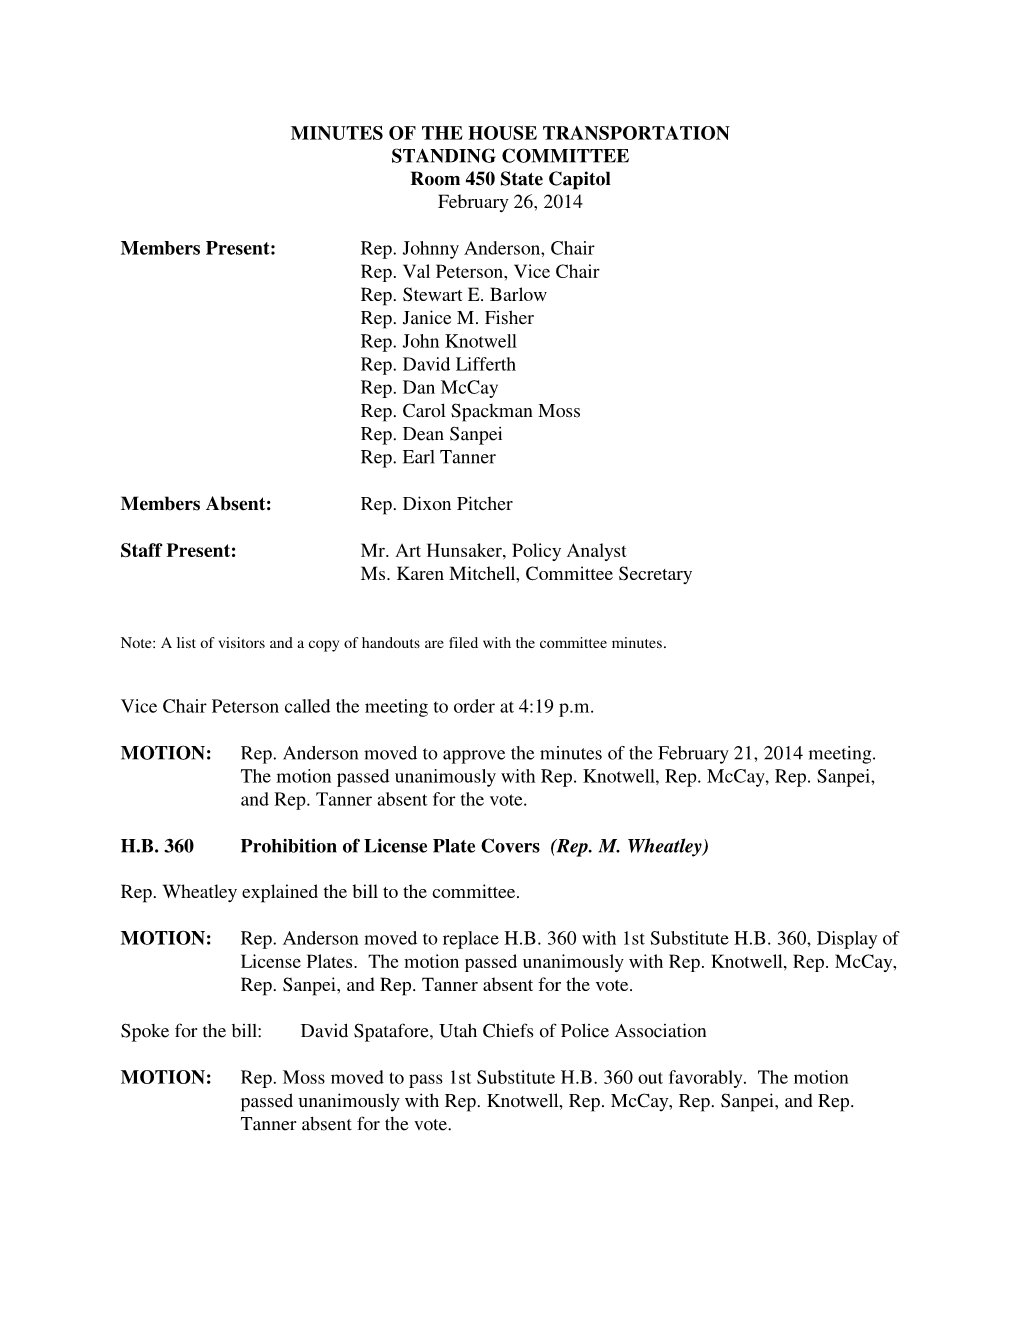 Minutes for House Transportation Committee 02/26